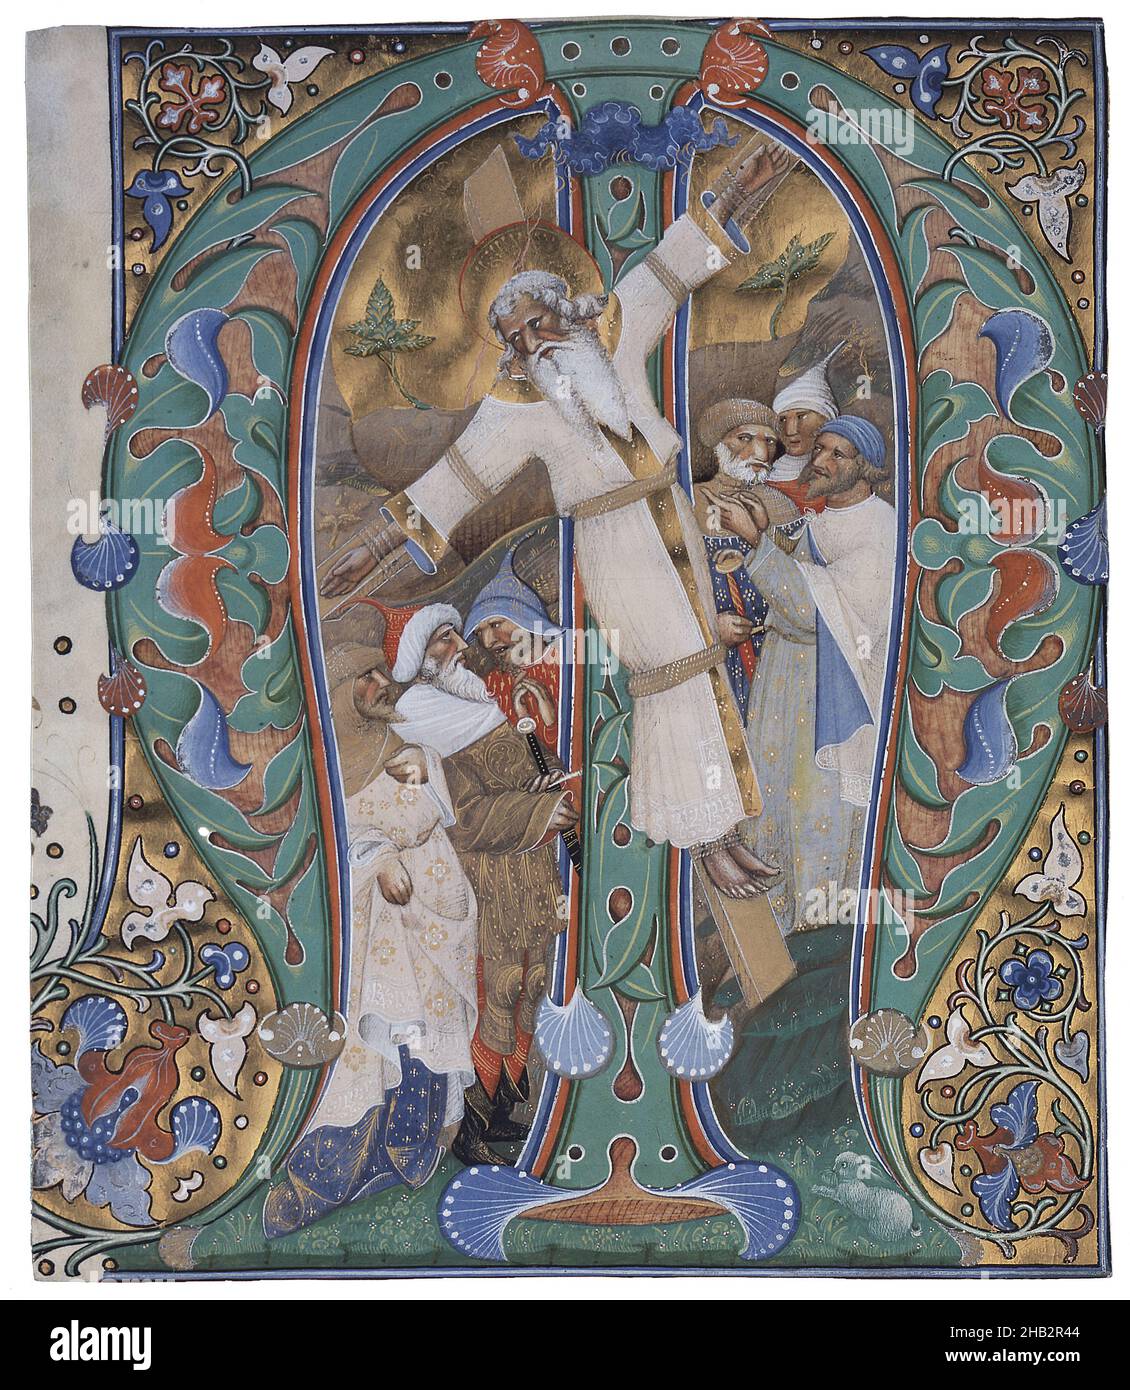 The Crucifixion of St. Andrew, Master of the Murano Gradual, Italian, active mid-15th century, 1440–50, Tempera and gold leaf on parchment, Made in Venice, Veneto, Italy, Europe, Books & manuscripts, 11 9/16 x 9 11/16 in. (29.3 x 24.6 cm Stock Photo